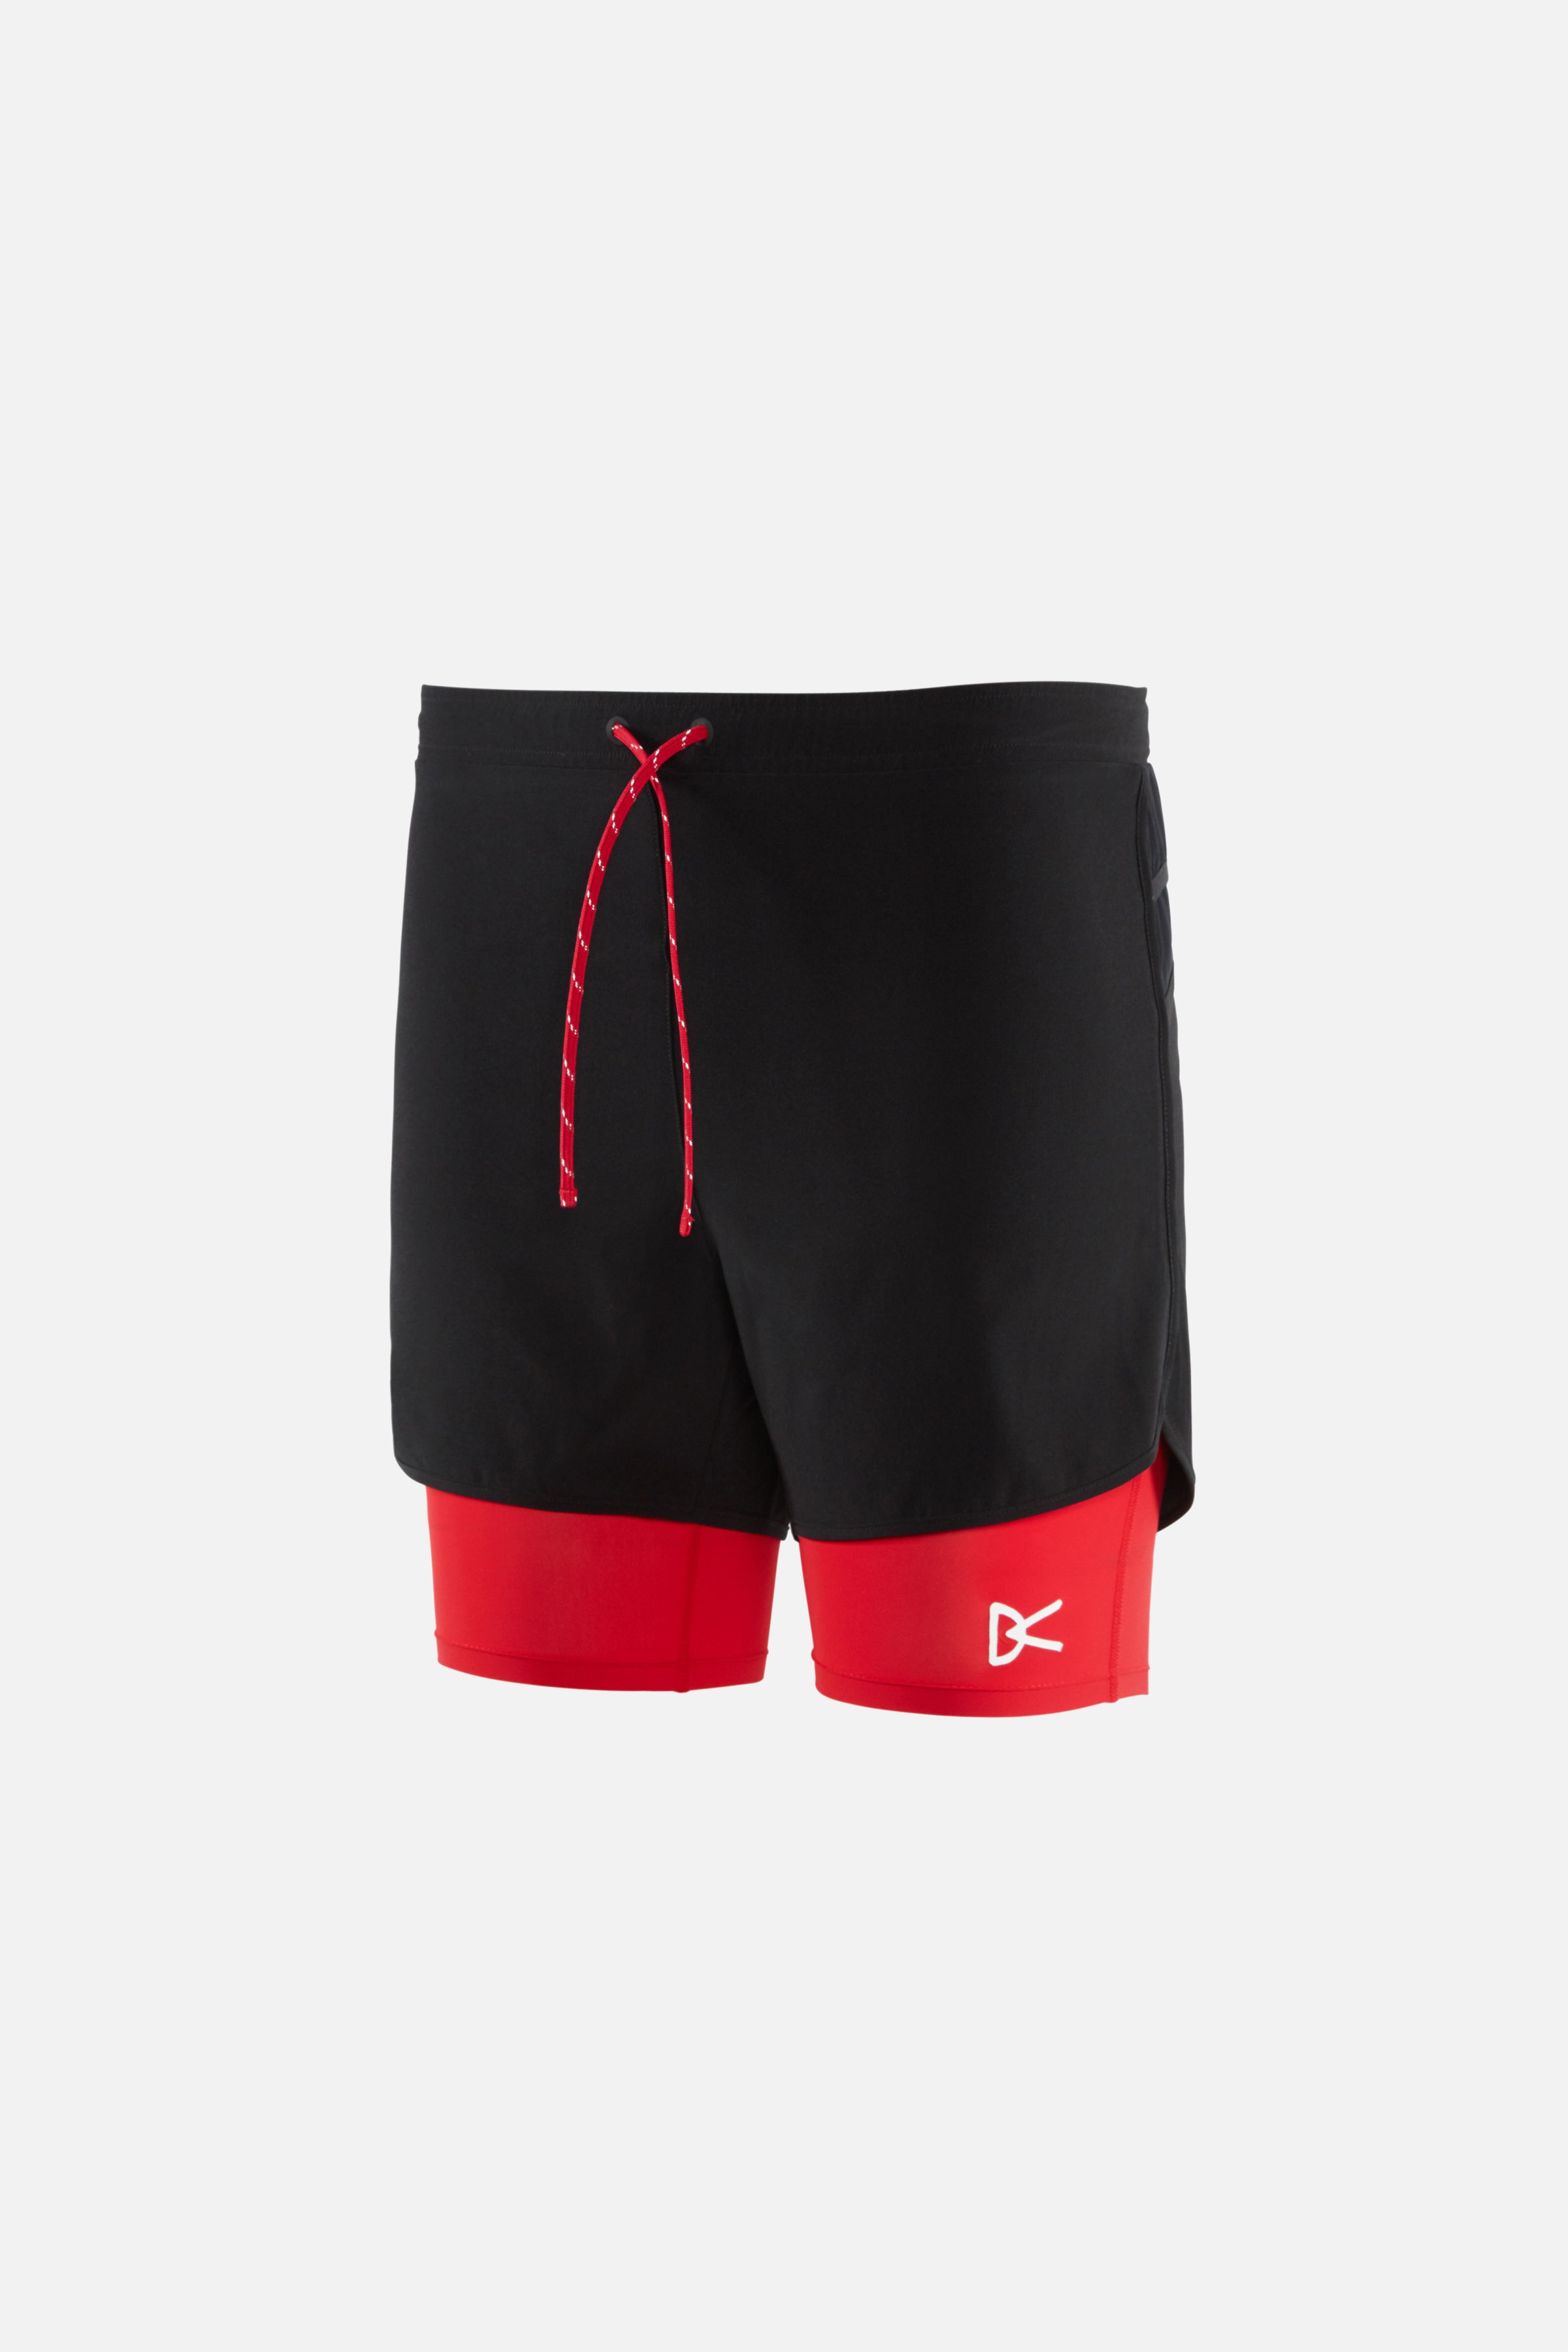 Aaron Layered Shorts, Black Red